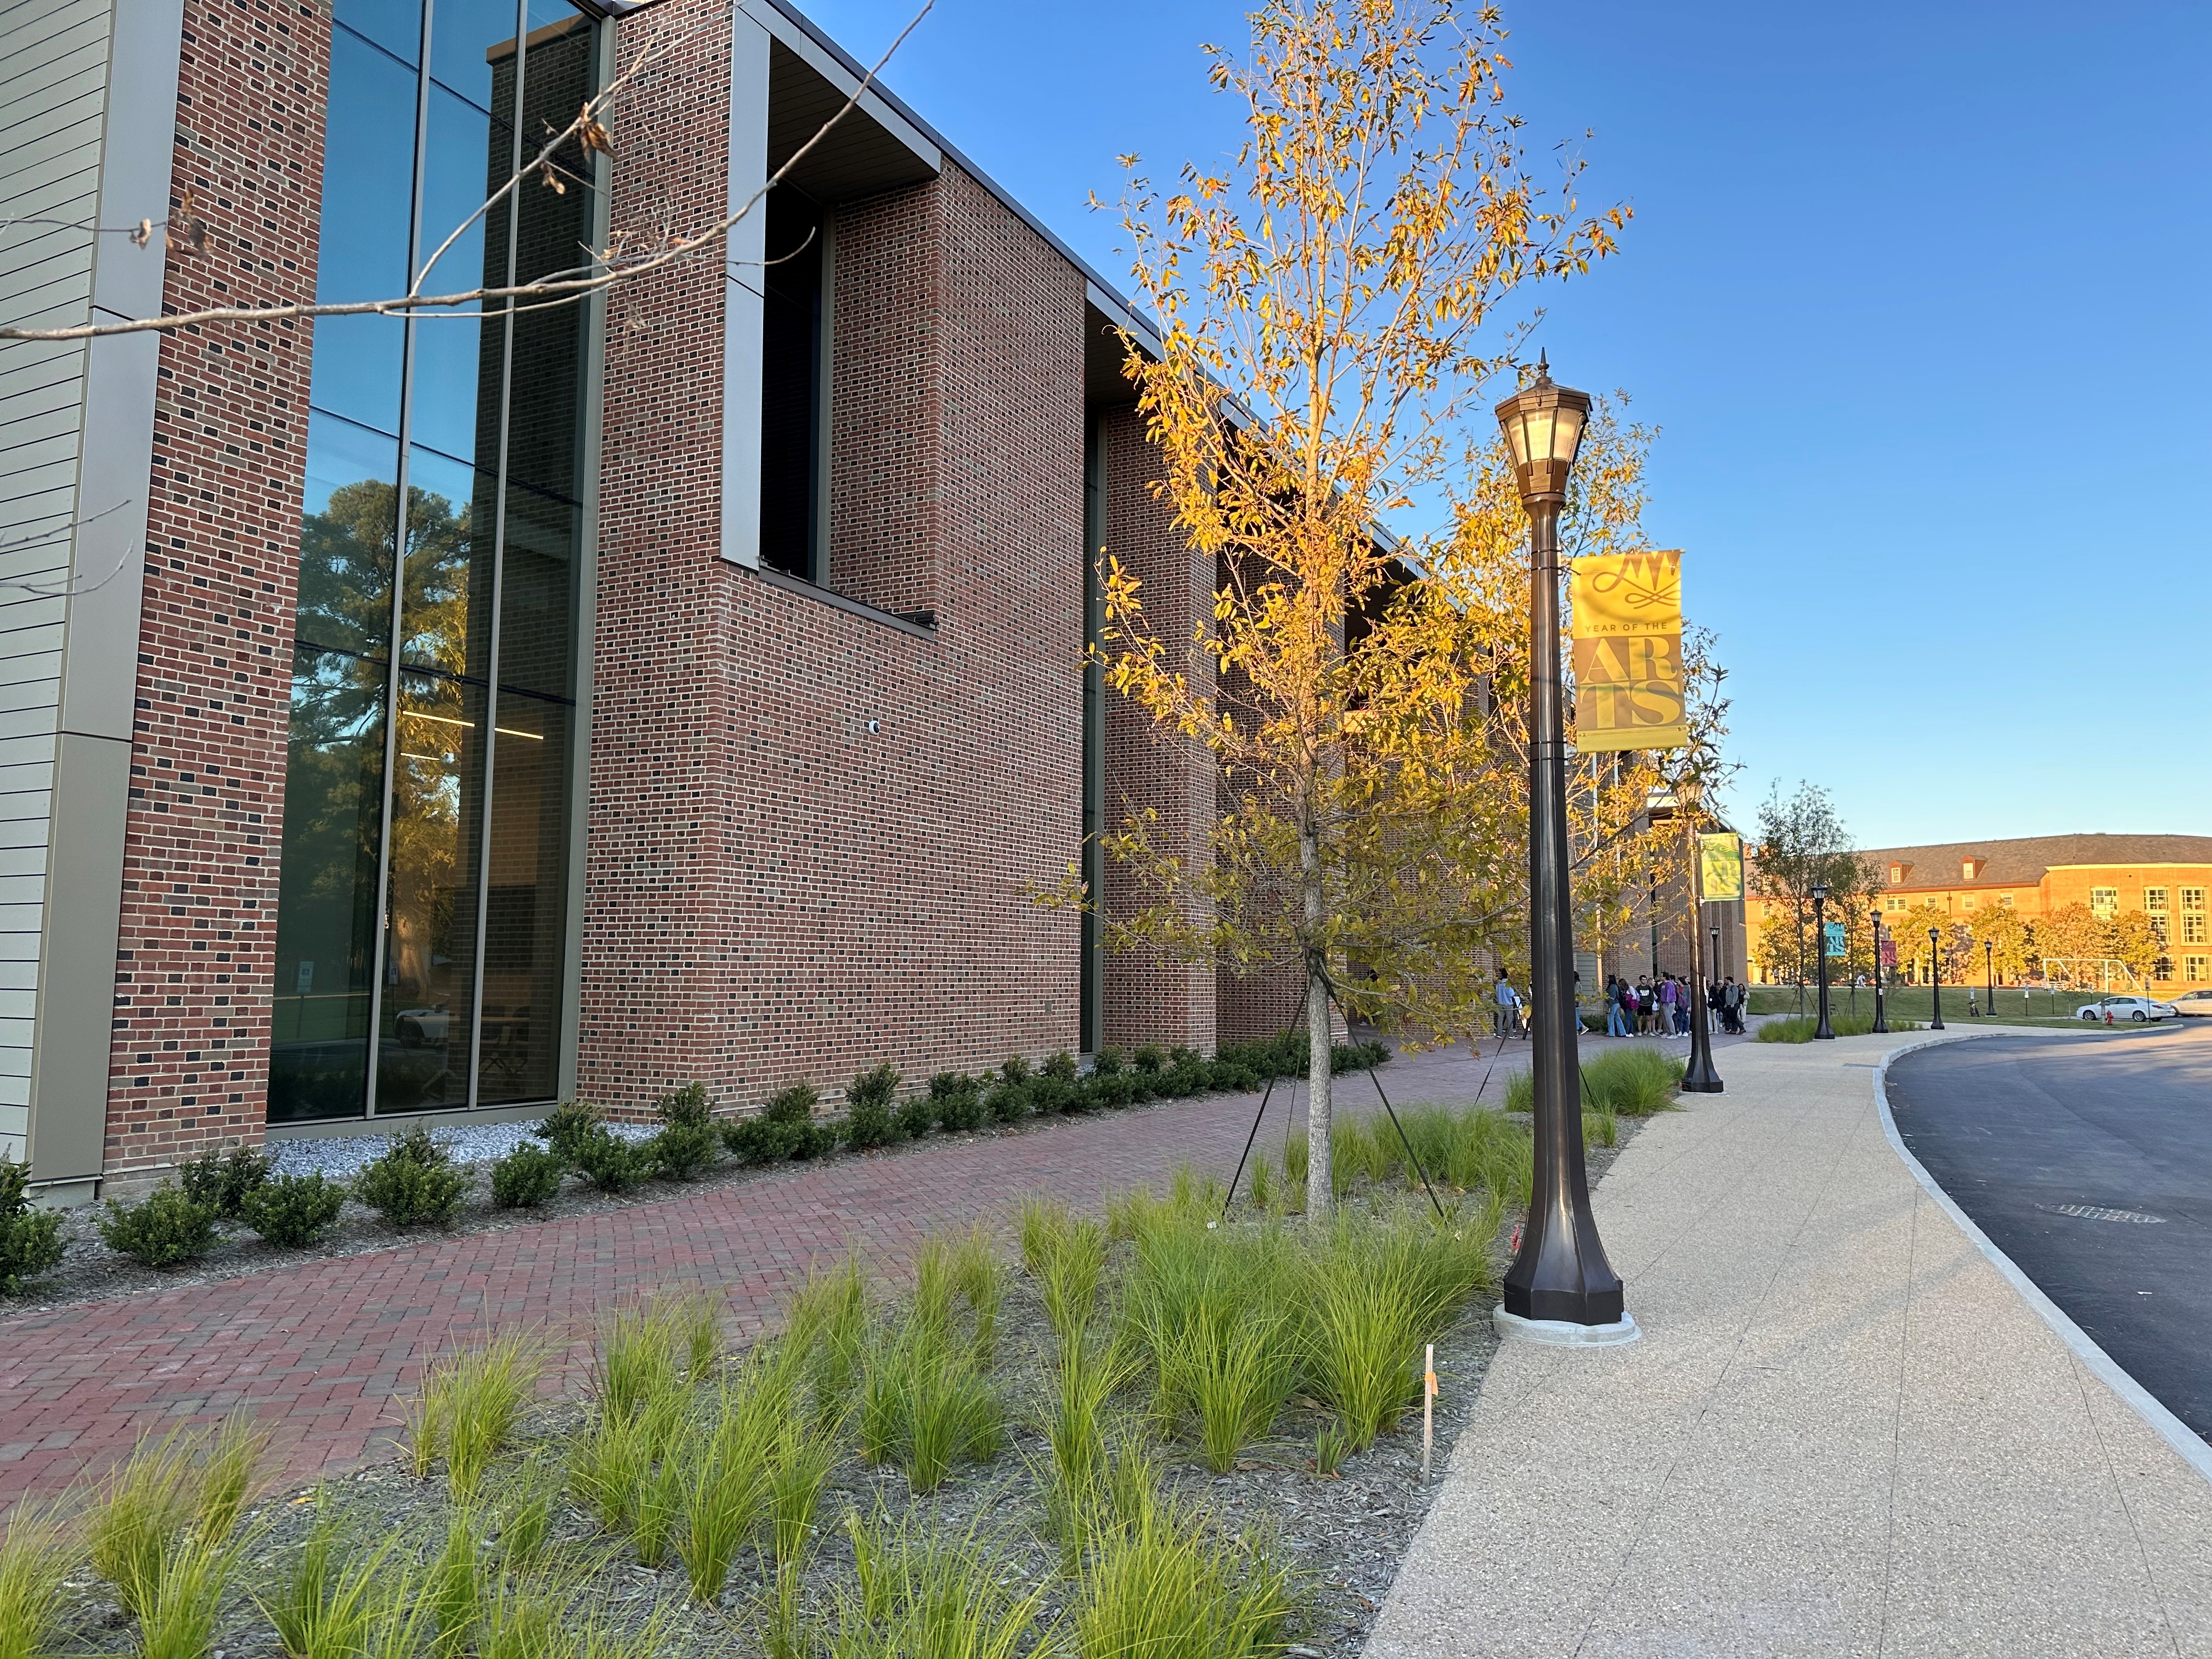 Light posts and newly planted trees and grasses line a walkway to a new brick and glass building.